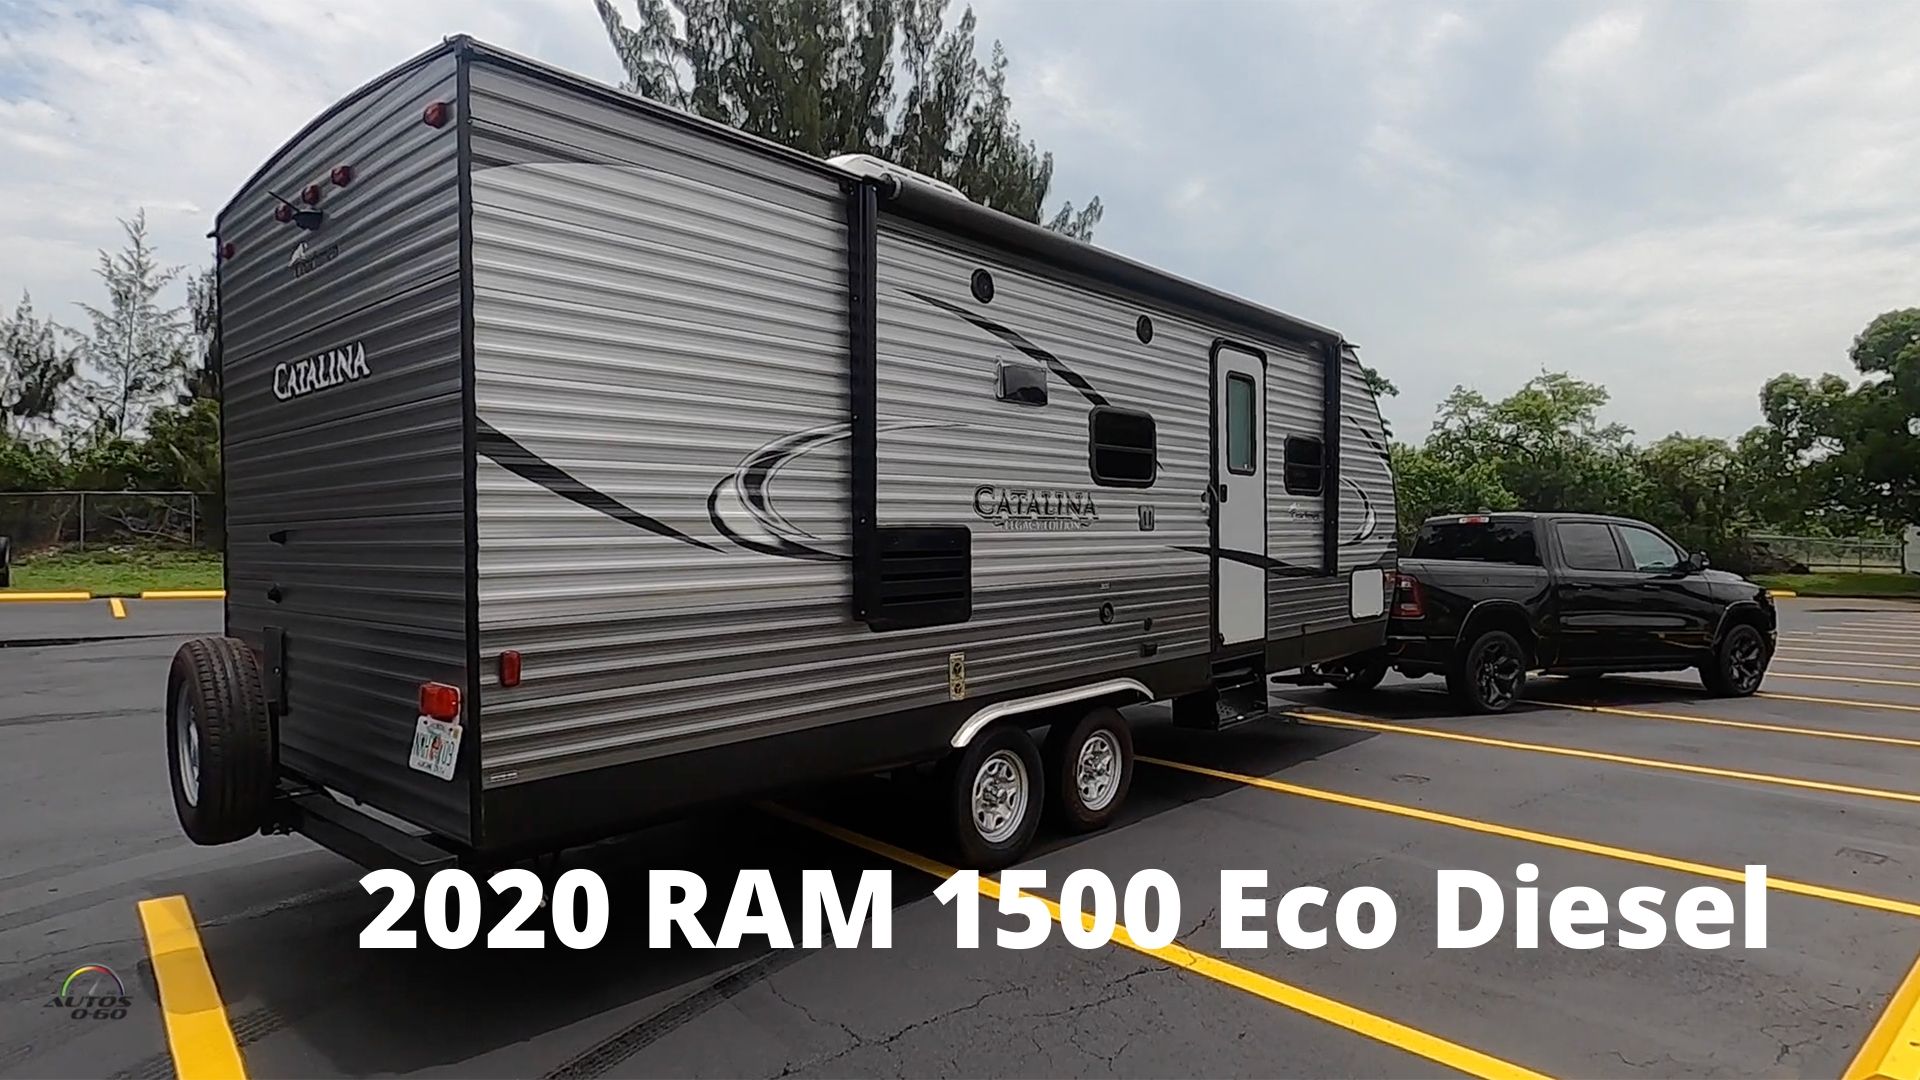 Real life 2020 RAM 1500 Limited Crew Cab Eco Diesel Test Drive